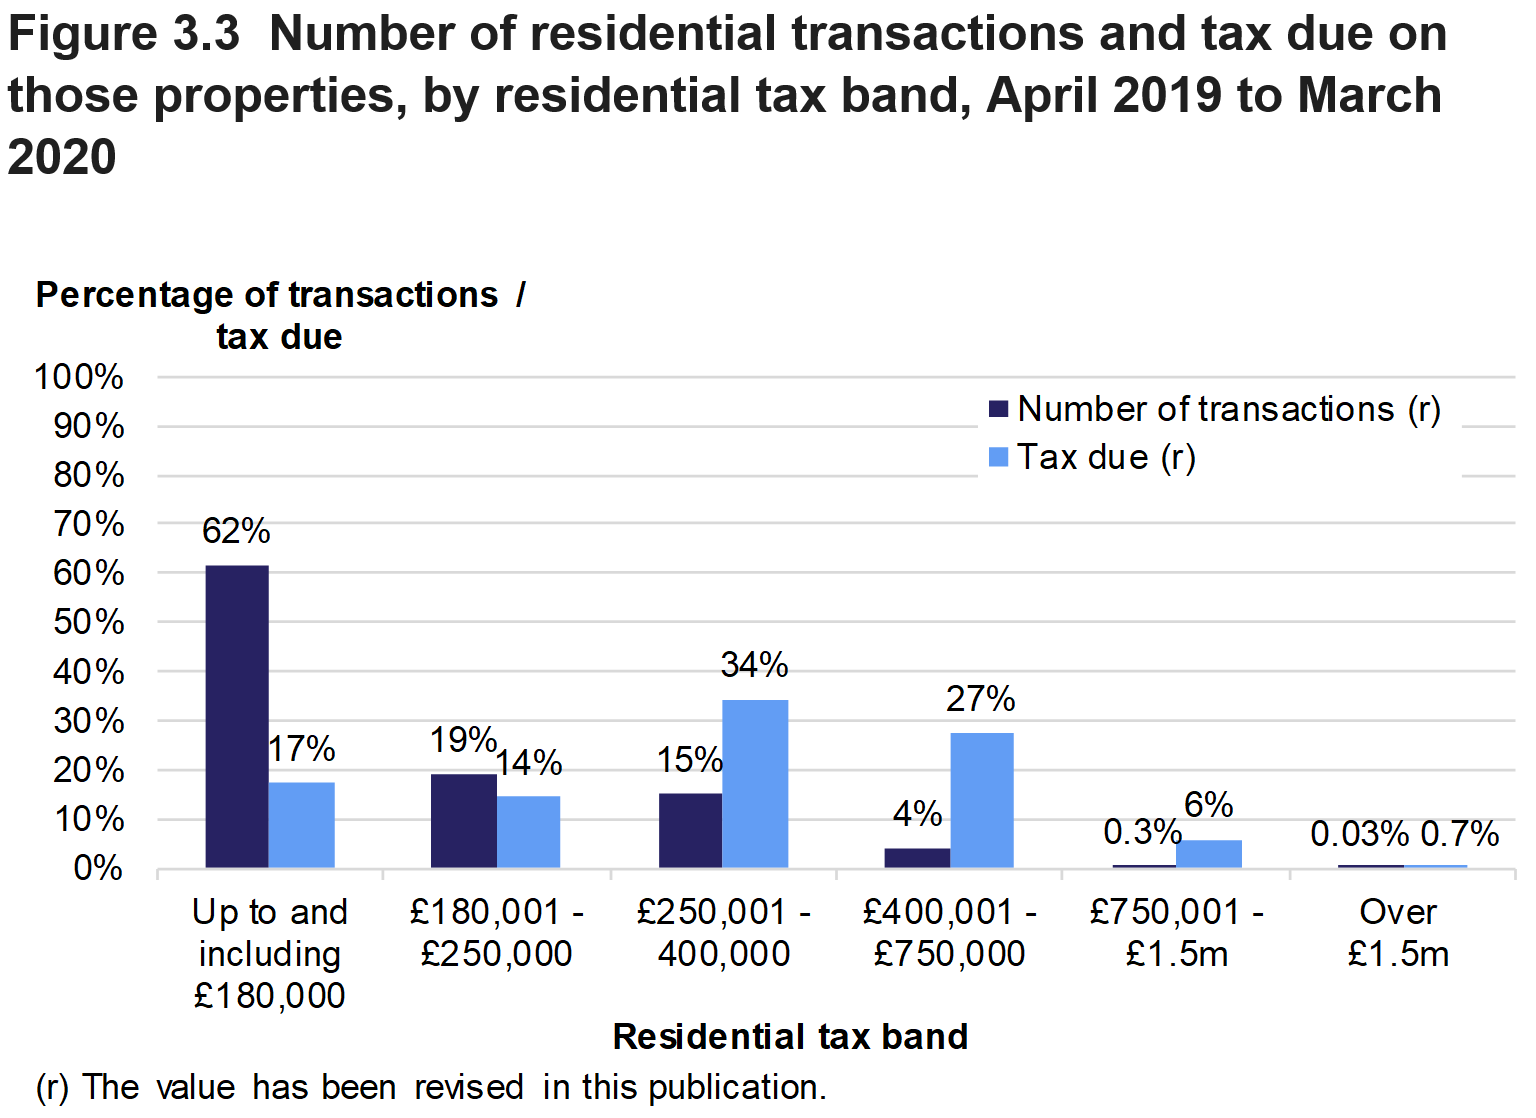 Figure 3.3 shows the number of residential transactions and amount of tax due, by residential tax band. Data is presented as the percentage of transactions or tax due and relates to transactions effective in April 2019 to March 2020.